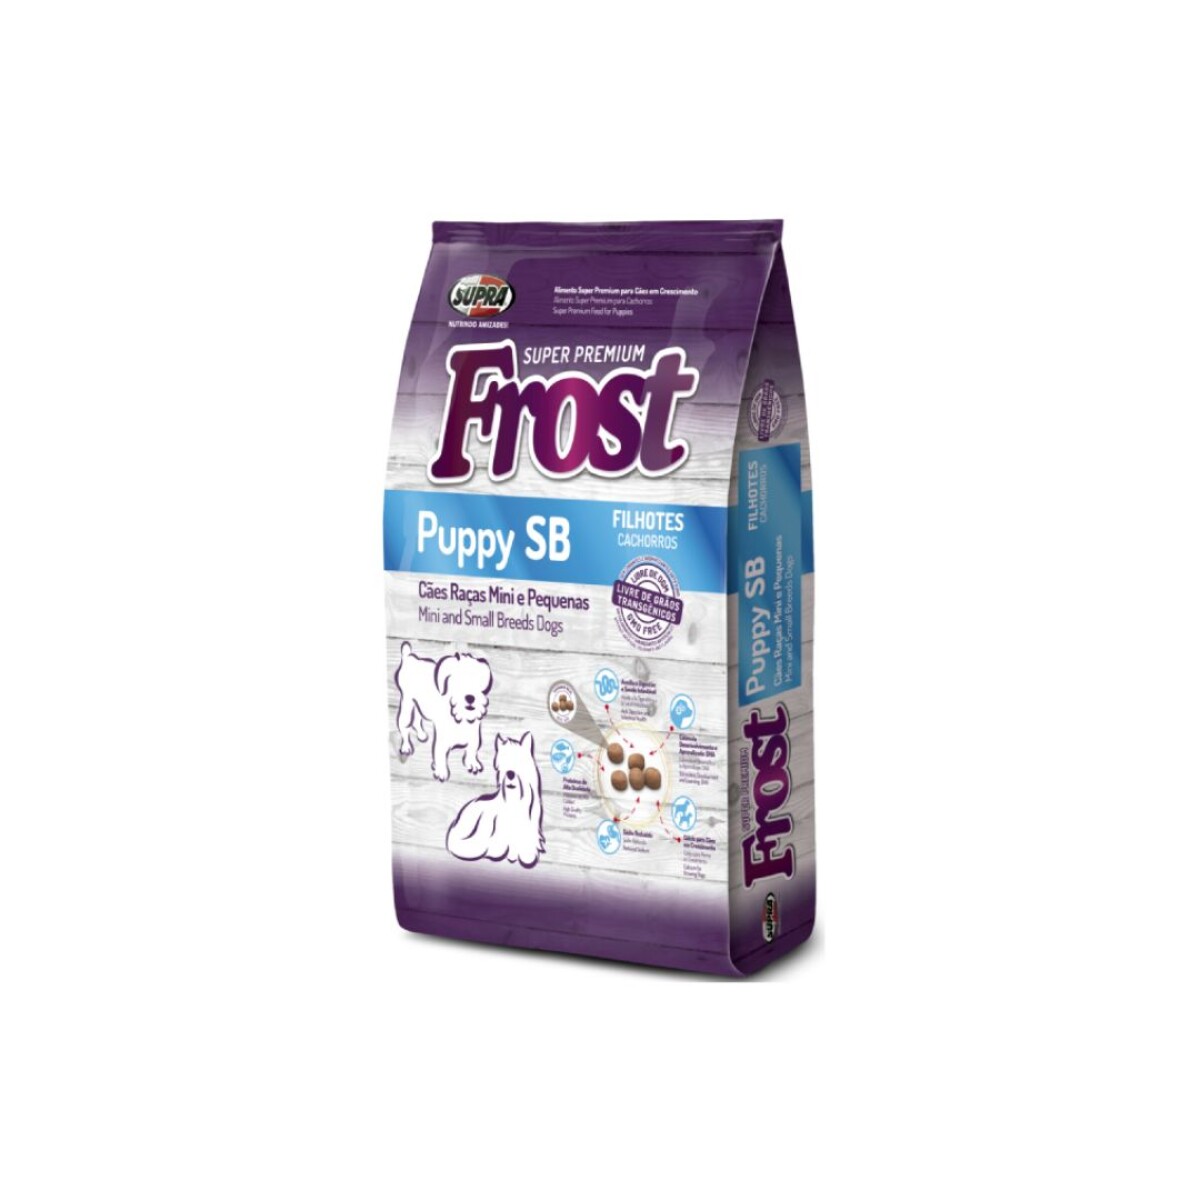 FROST PUPPY SB 2,5KG - Unica 